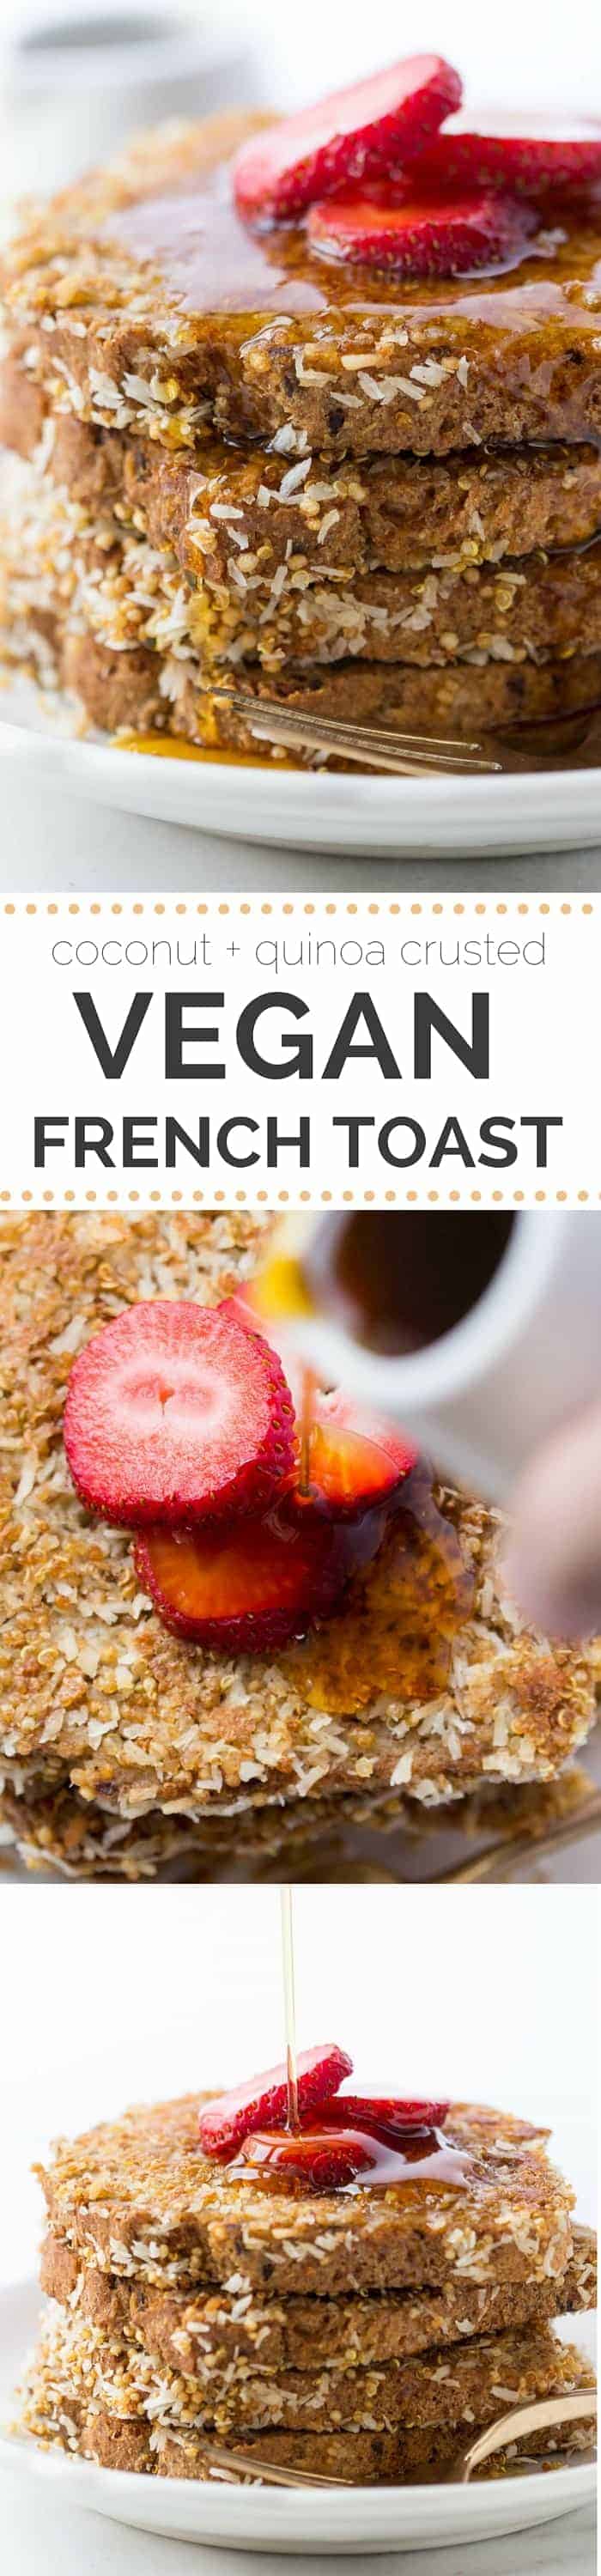 Coconut + Quinoa VEGAN FRENCH TOAST! so simple and with only 7 ingredients - healthy too!